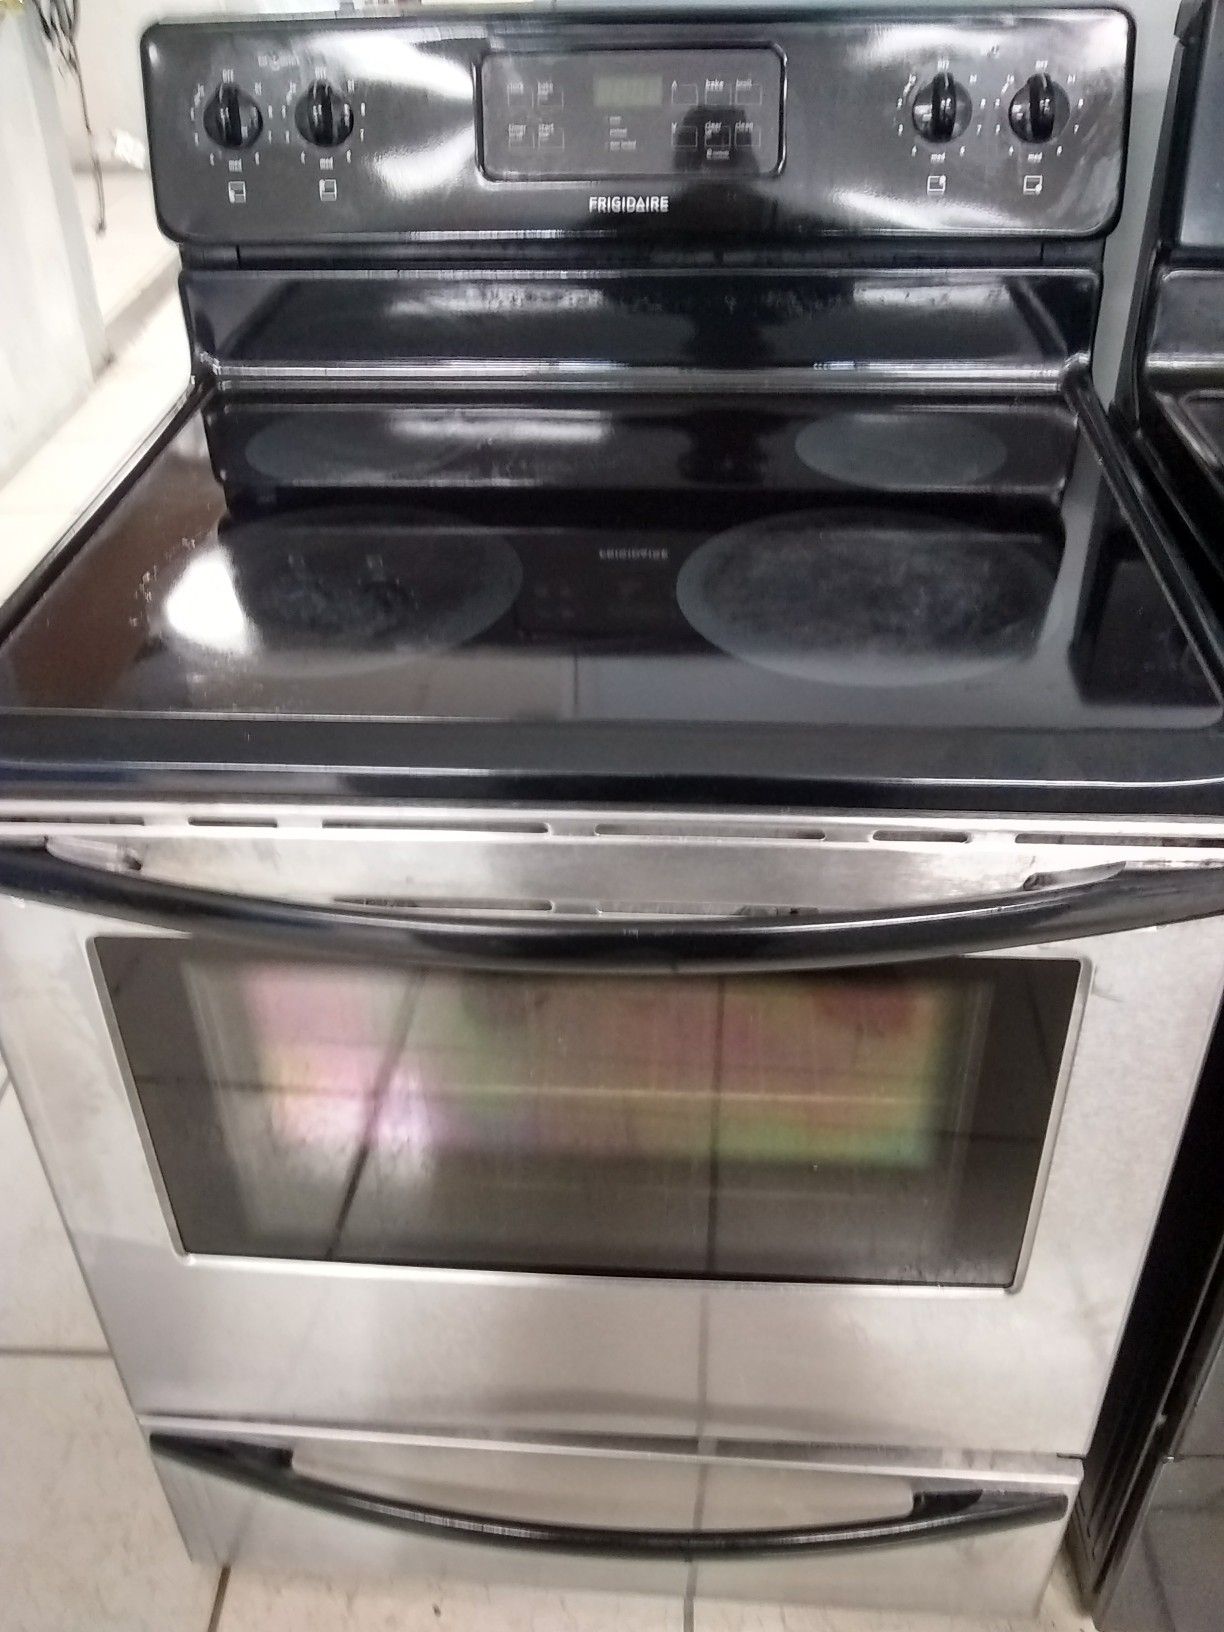 Frigidaire stainless steel glass top stove